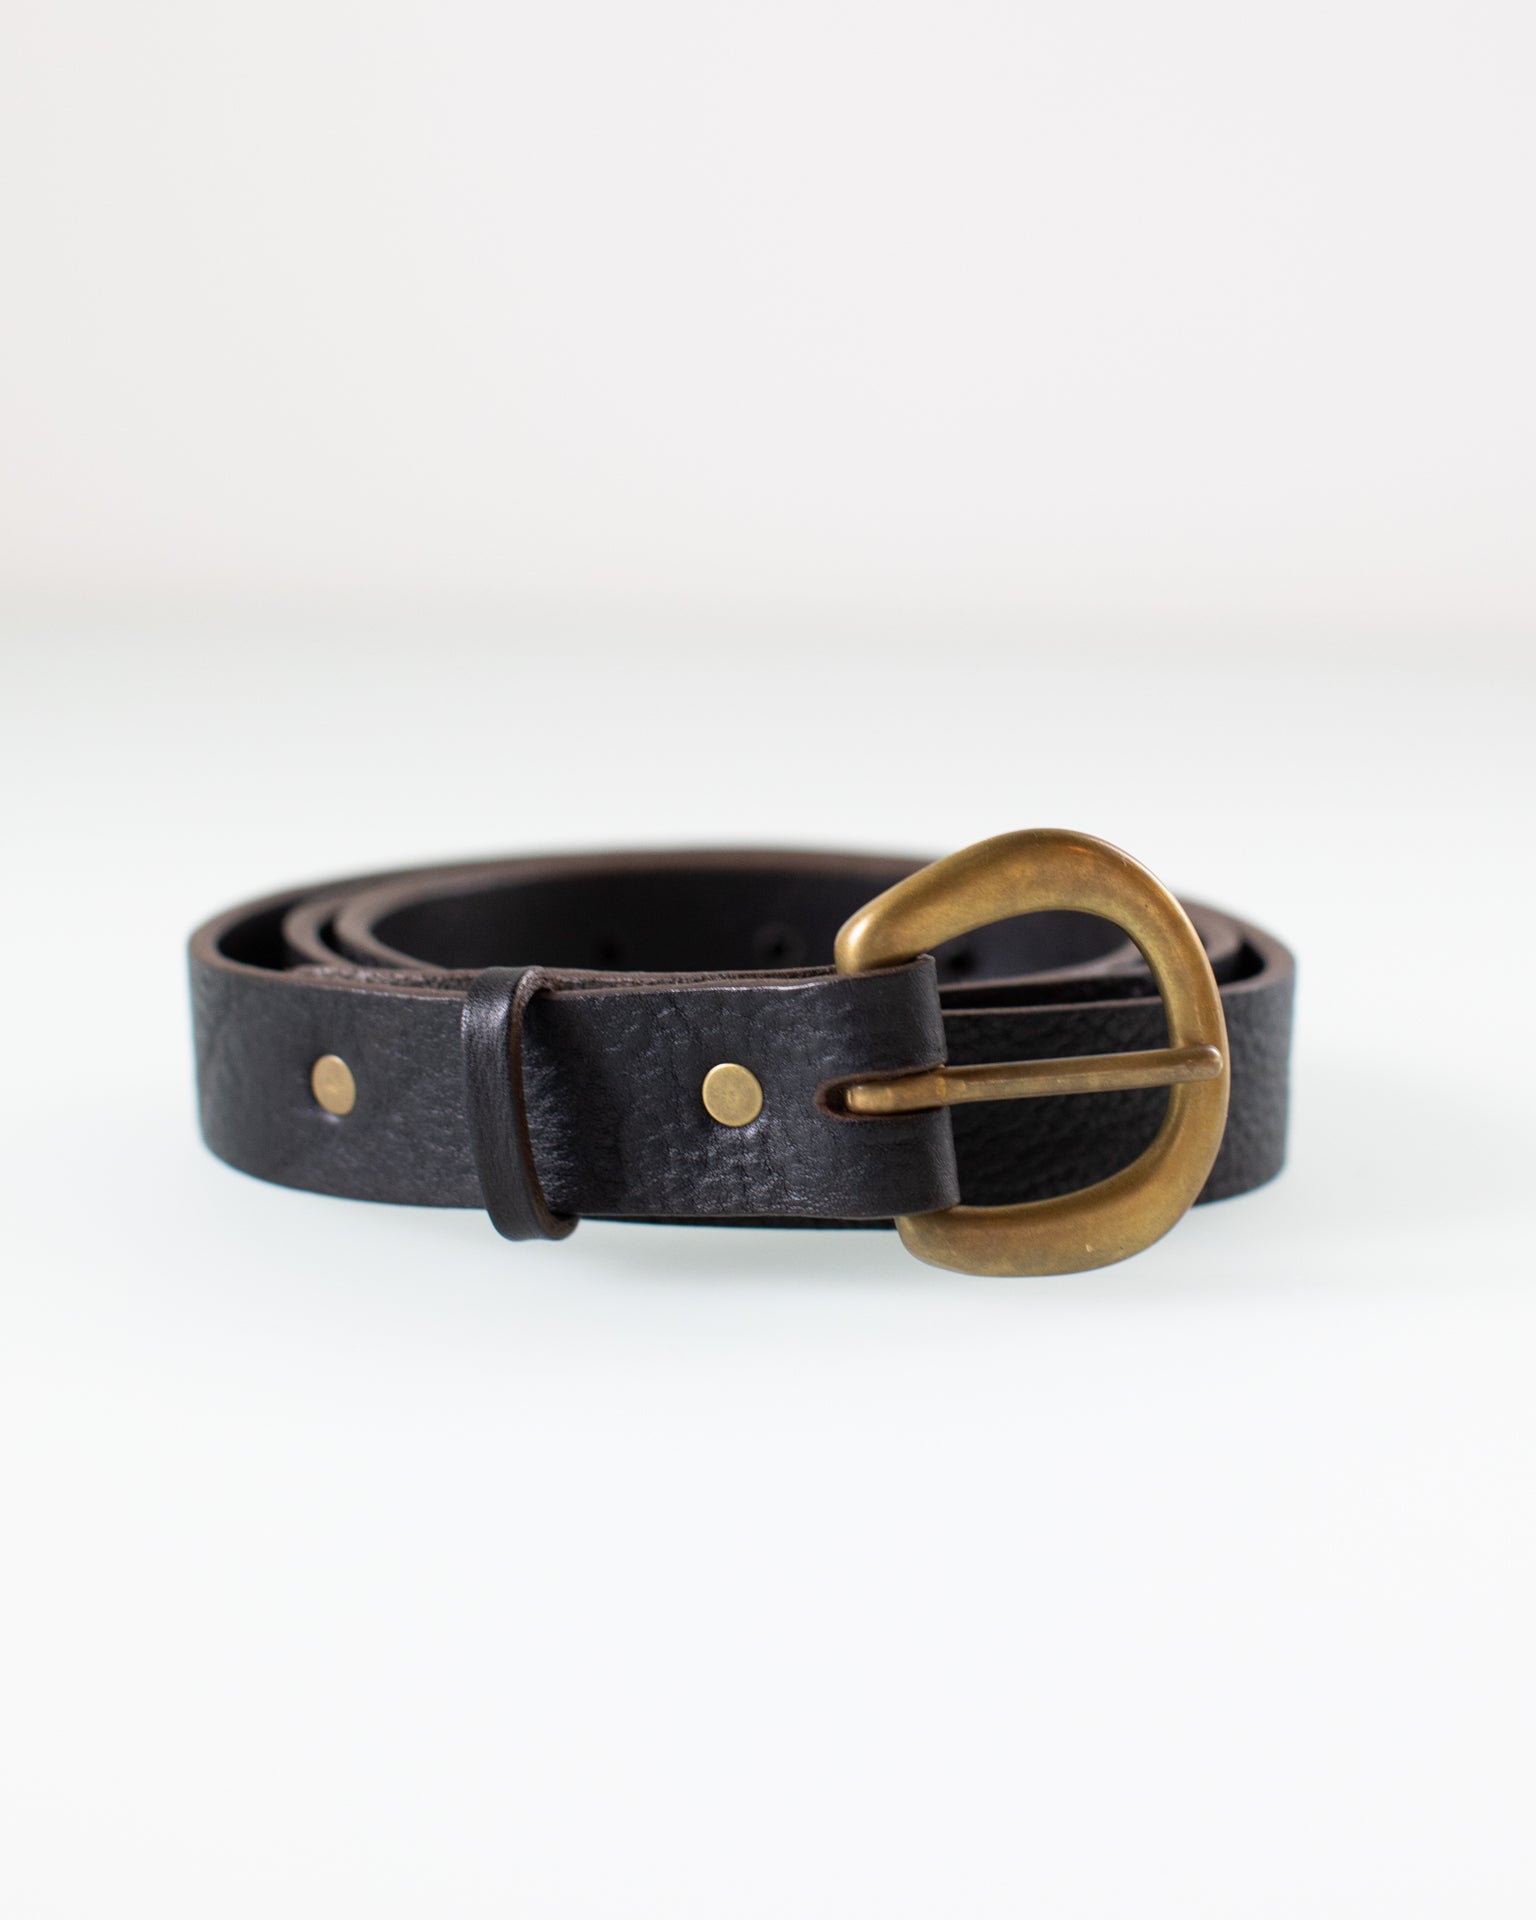 Depalma Handsewn CL 1 inch Belt in Black/Brass - Bliss Boutiques